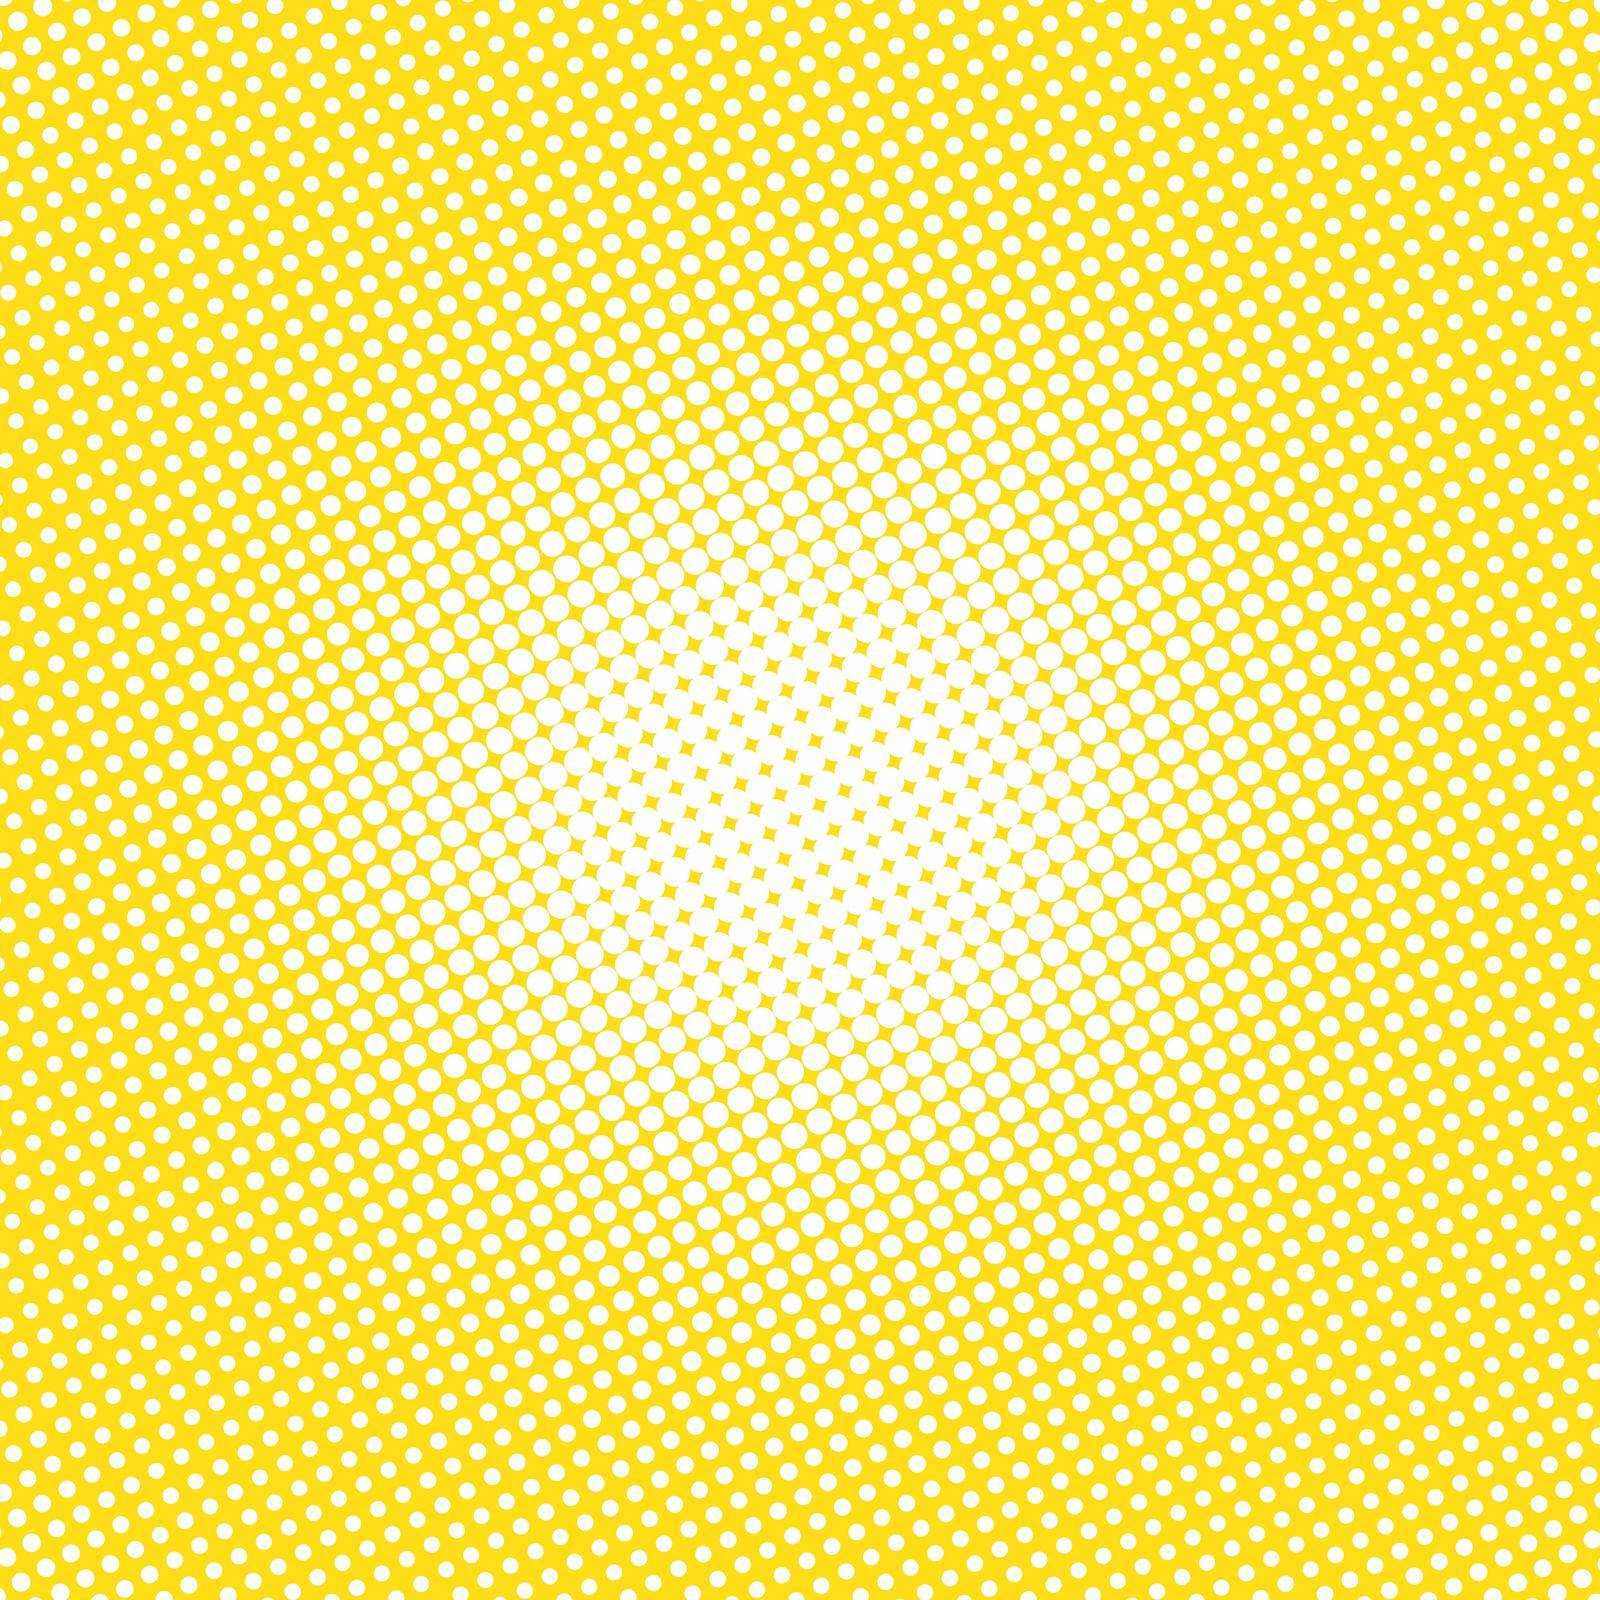 Halftone illustrator. Dots on Background. Yellow and white Geometric Pattern. Abstract Vector illustration. Modern Texture.